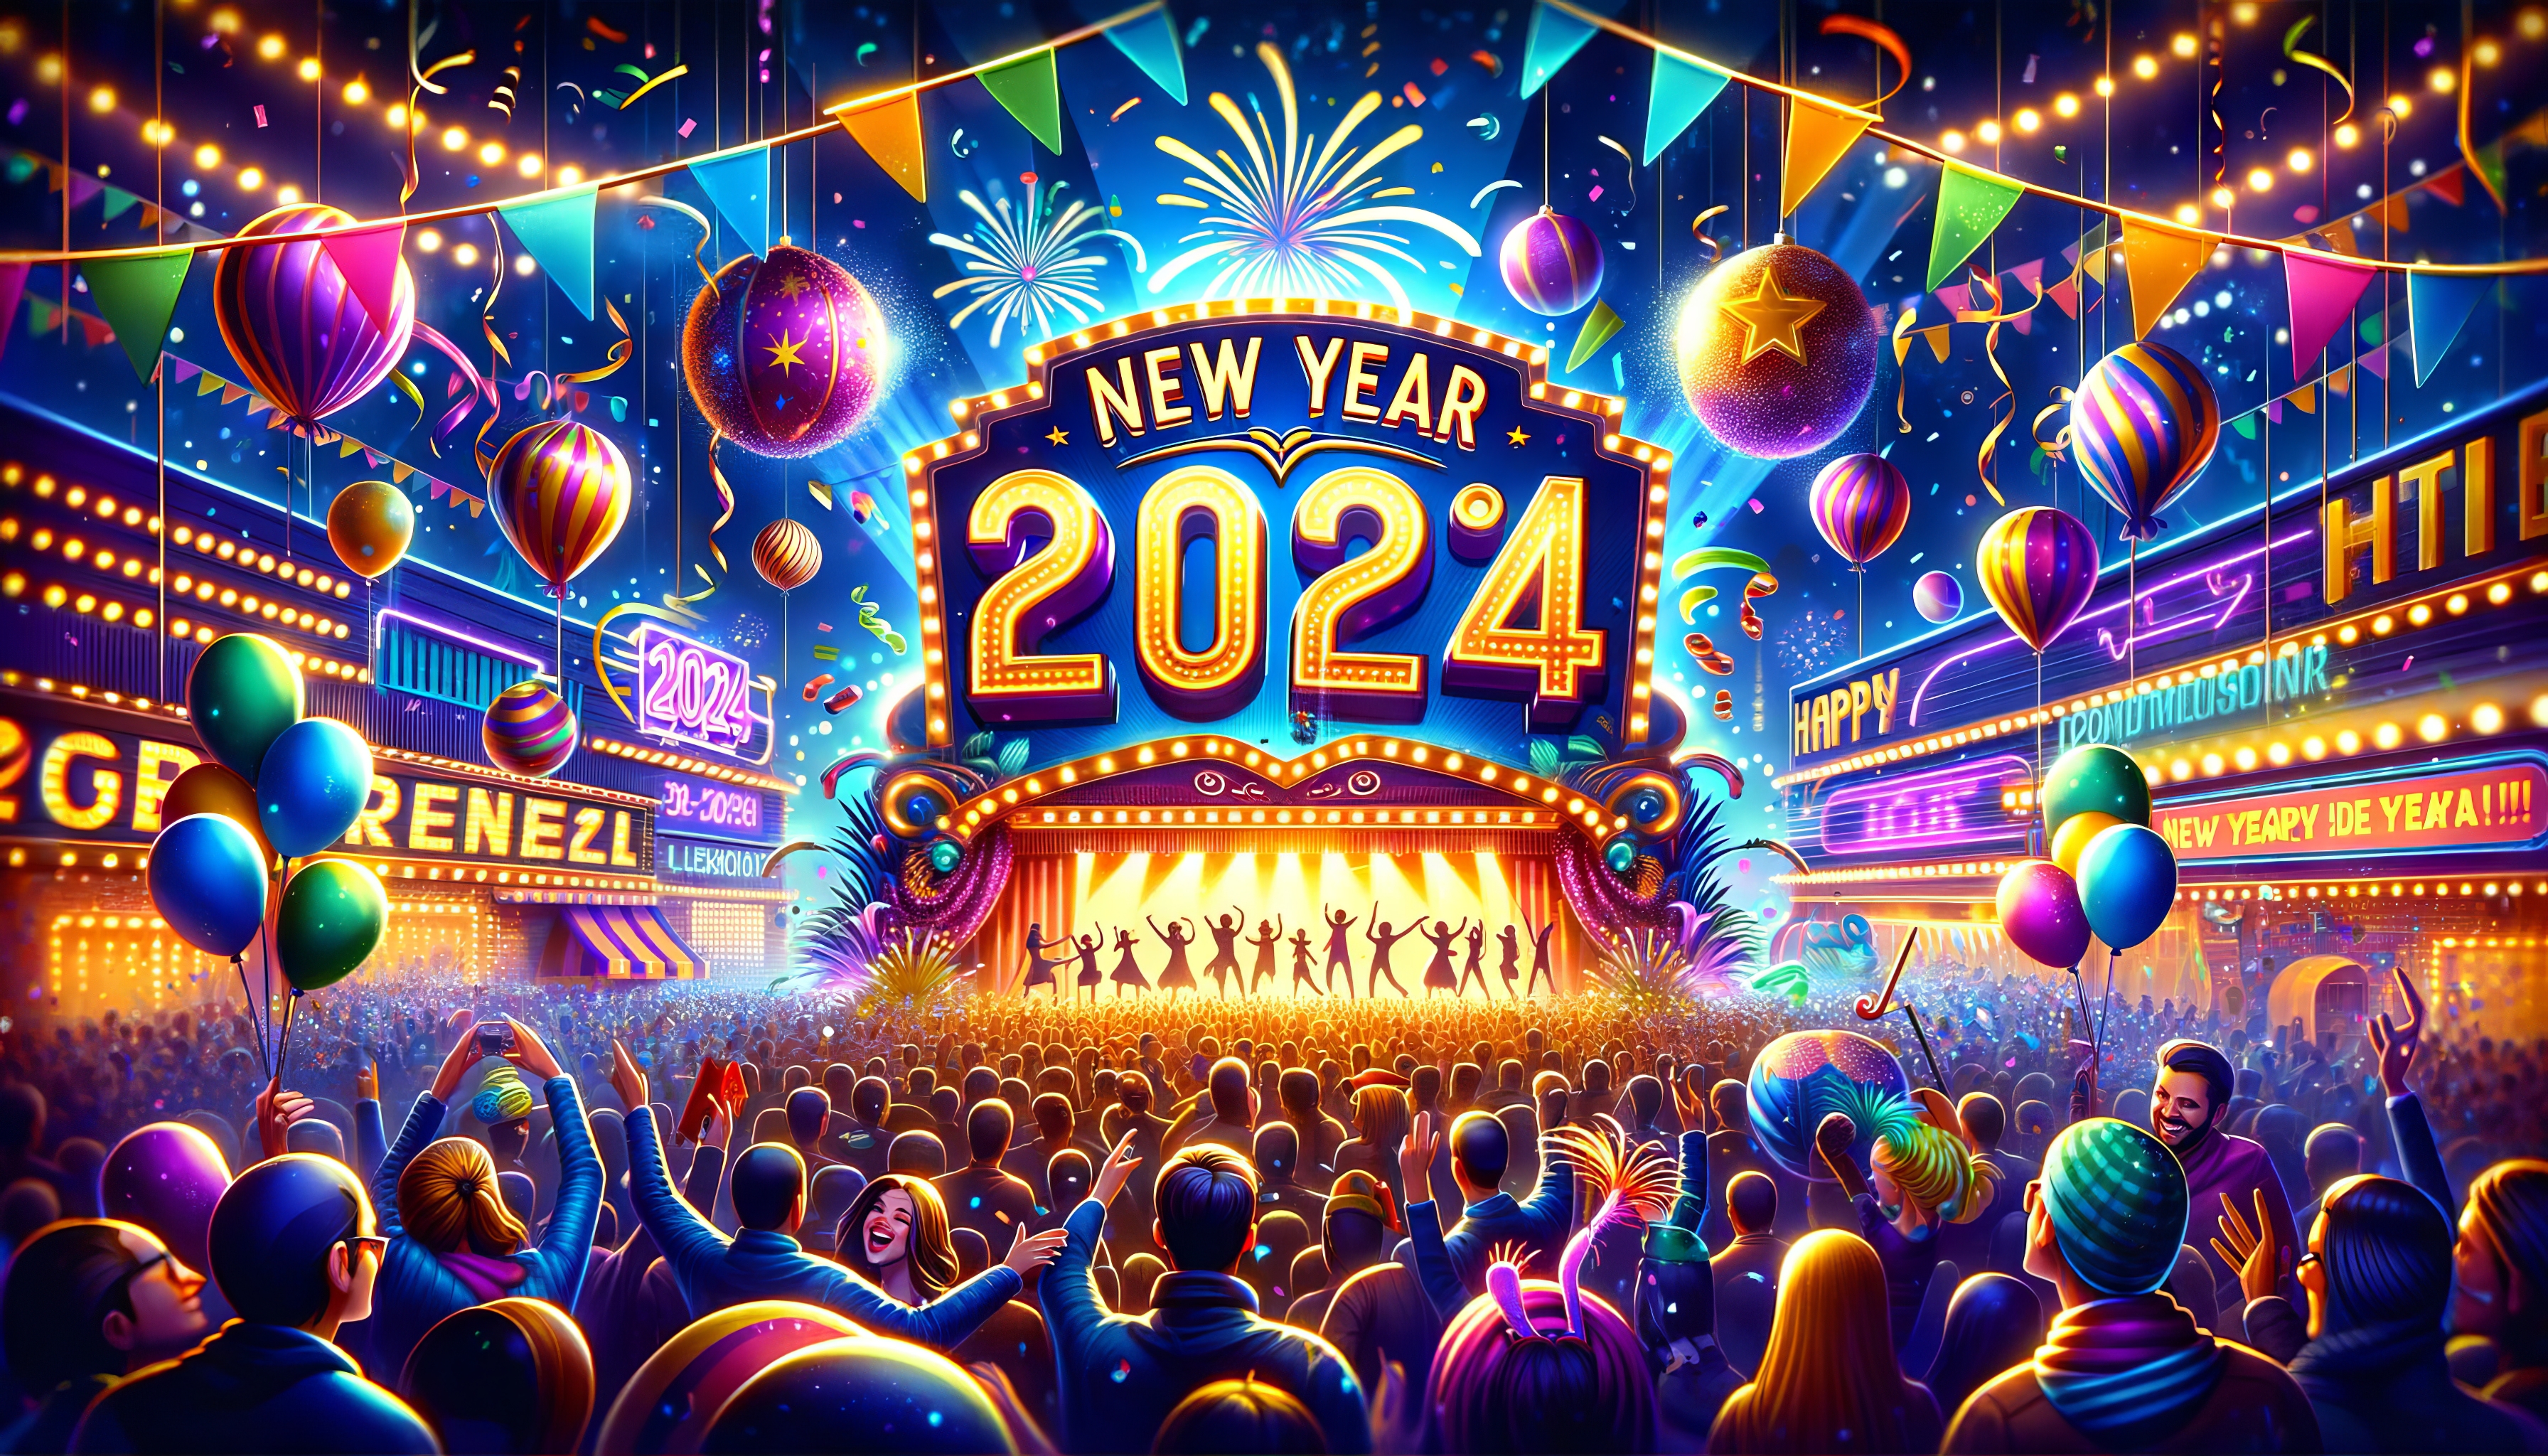 Alt Text: Vibrant New Year 2024 celebration HD wallpaper with colorful fireworks, balloons, and a festive crowd.